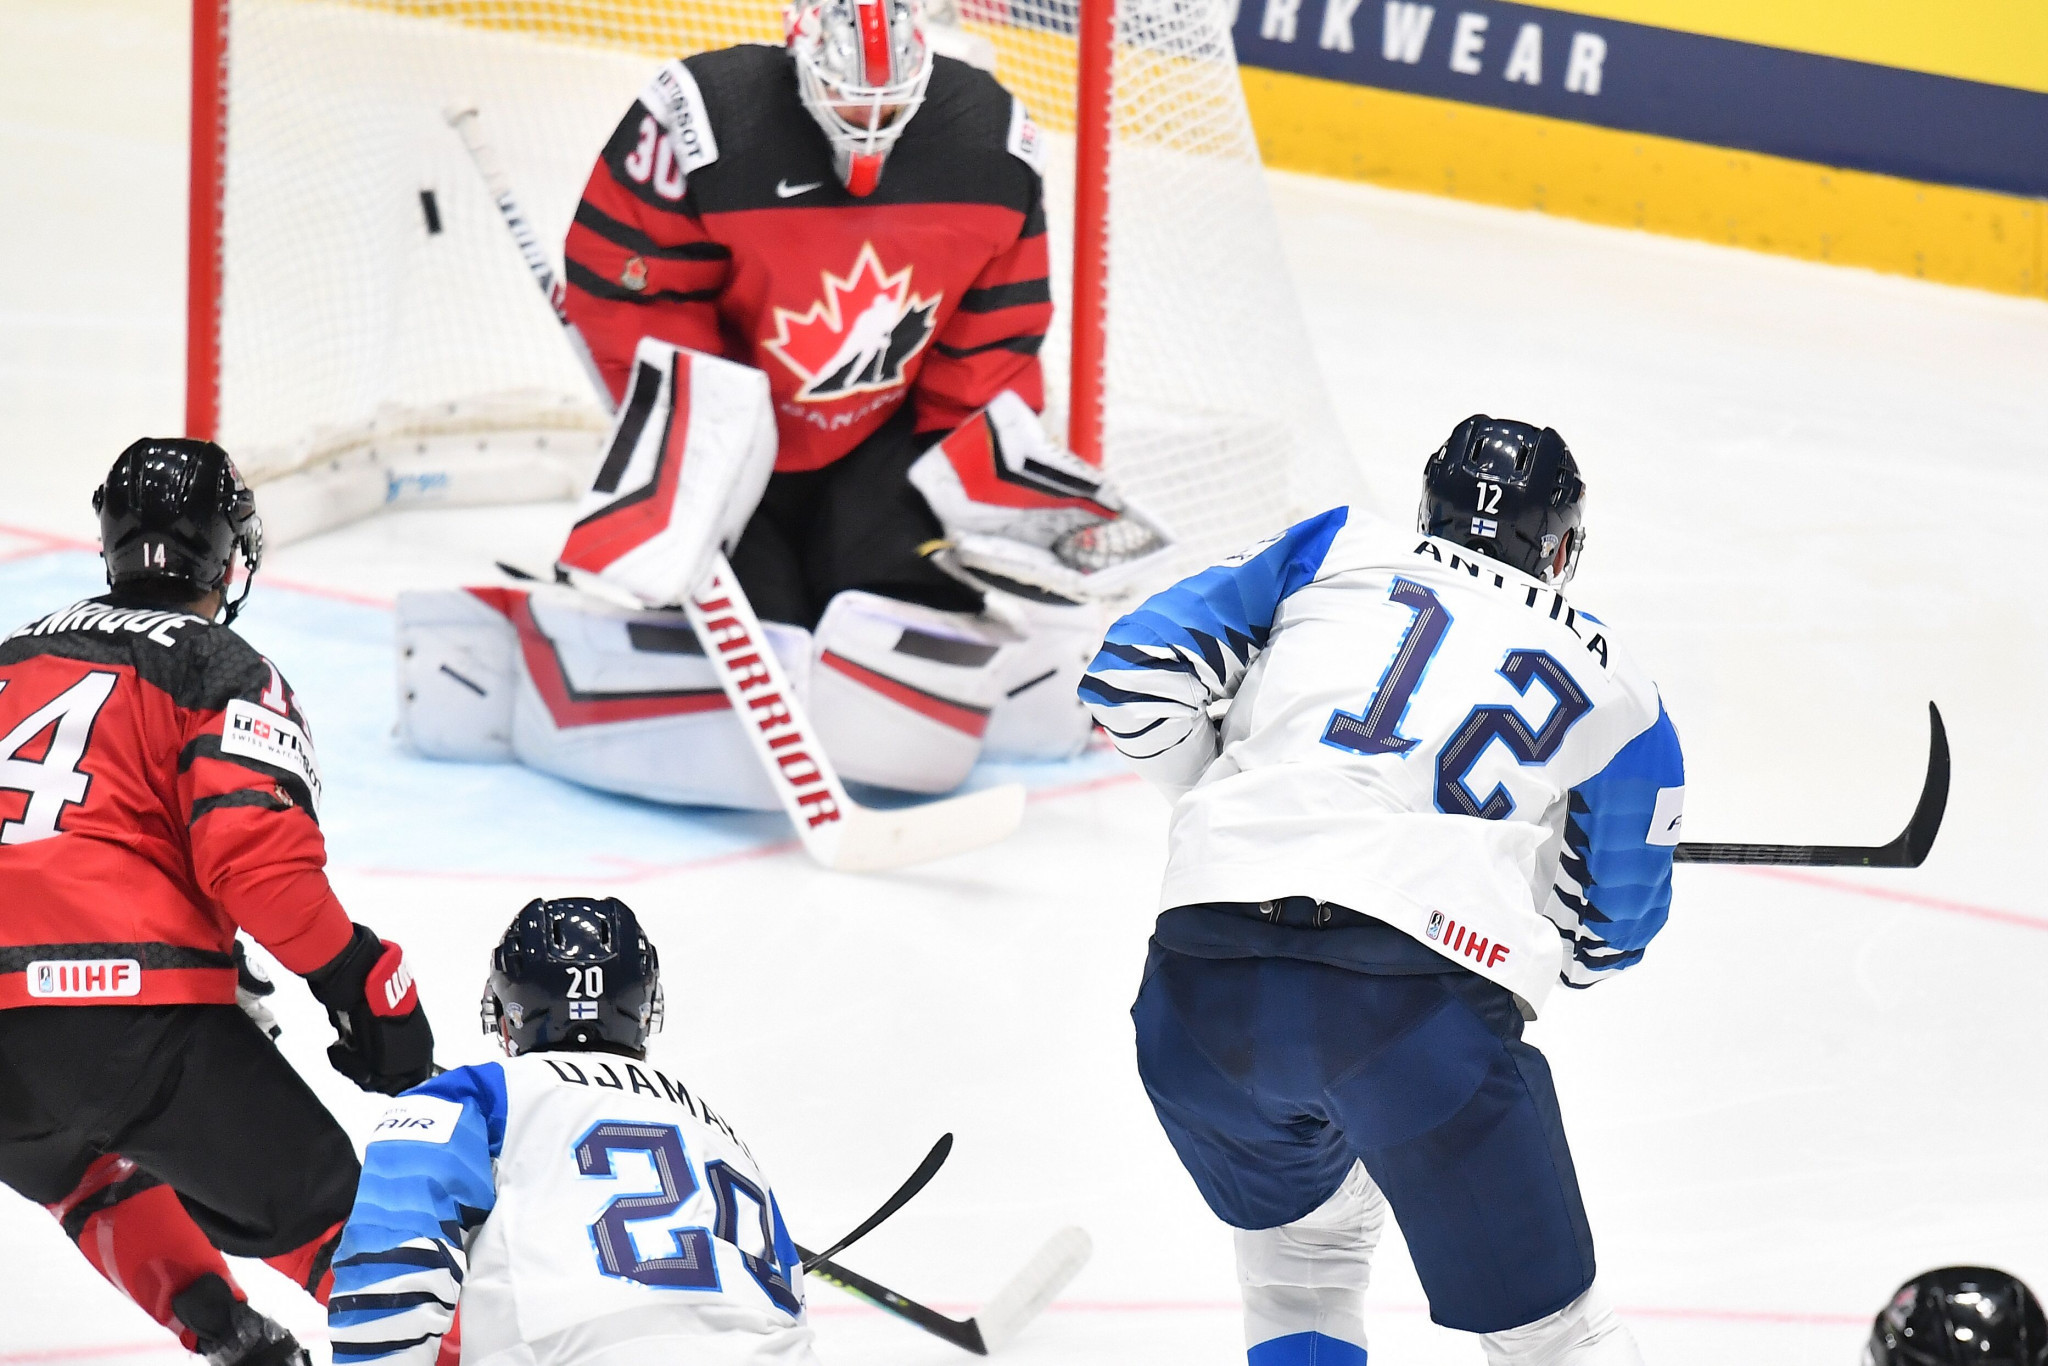 Marko Anttila scored two for Finland in their victory against Canada in the IIHF World Championship ©Getty Images